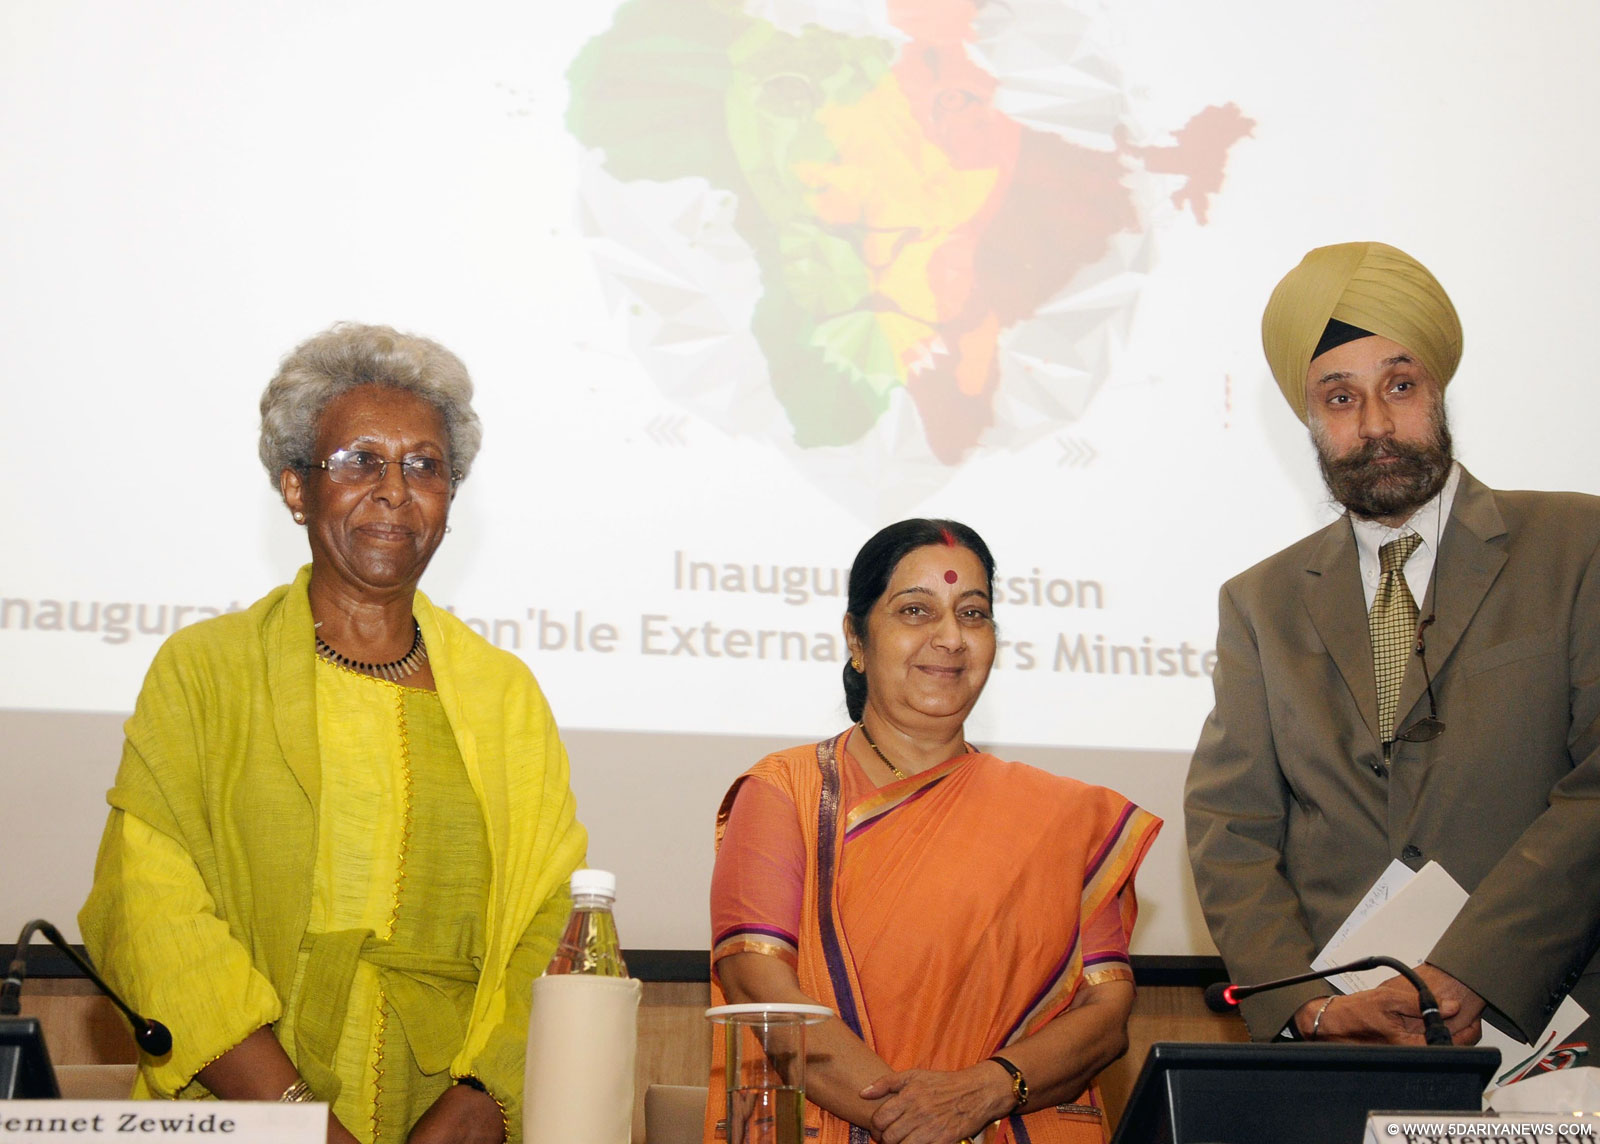 New Delhi: External Affairs Minister Sushma Swaraj and Ethiopian Ambassador Genet Zewdie (L) at the inauguration of the 3rd India Africa Editor